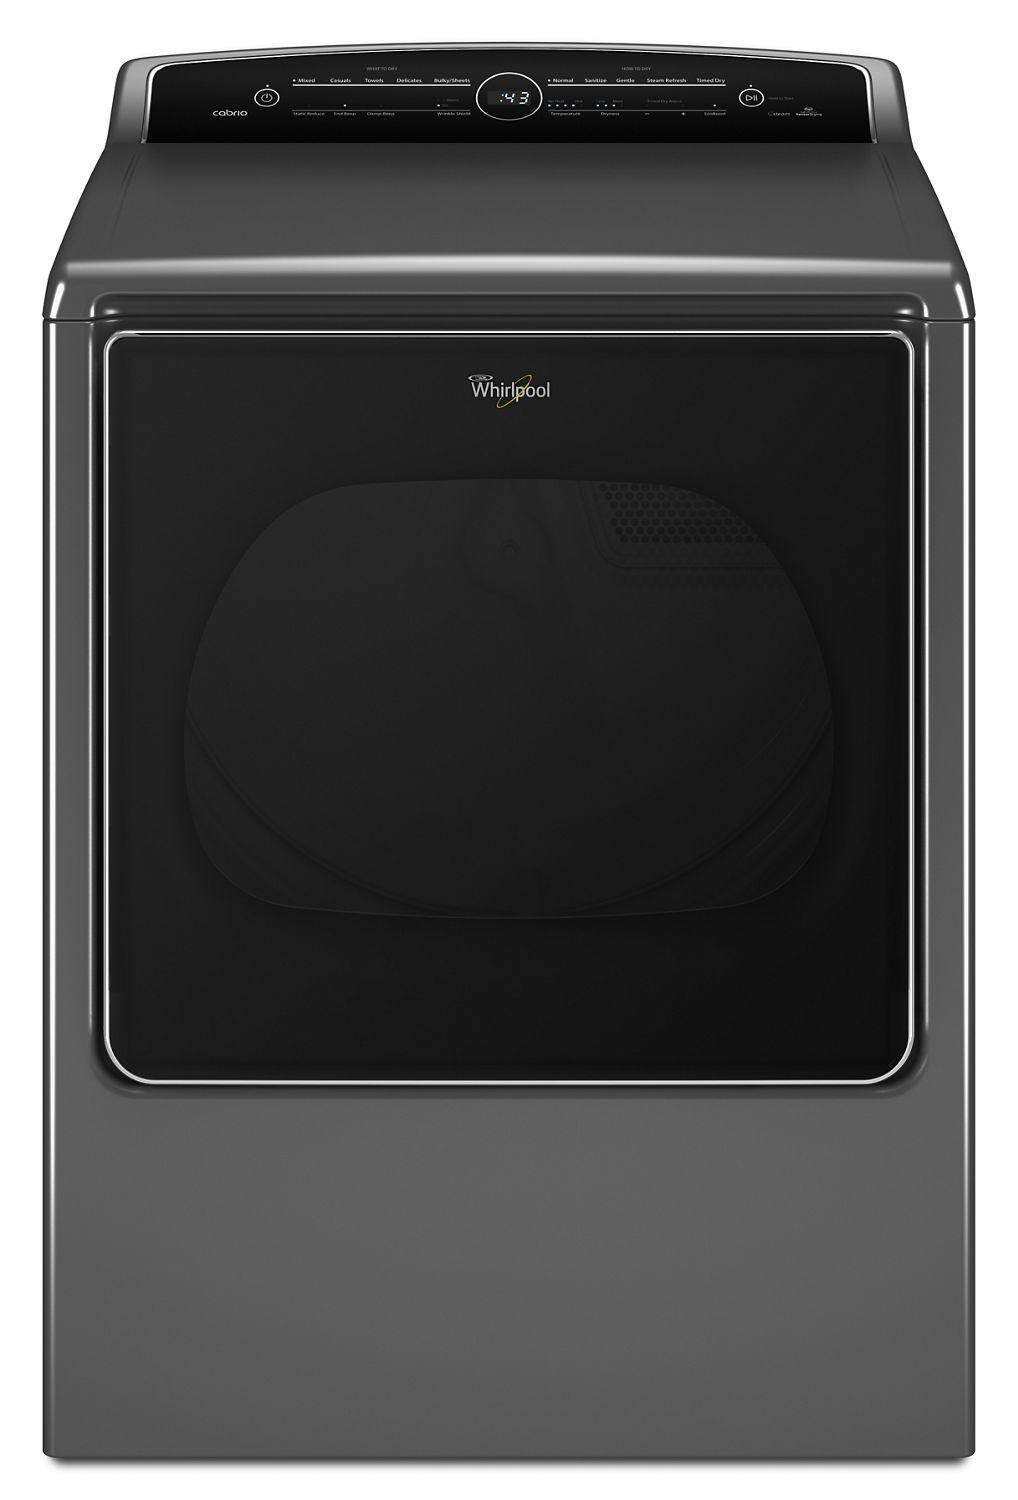 Whirlpool 8.8 cu.ft Top Load HE Gas Dryer with Intuitive Touch Controls, Steam Refresh Chrome Shadow